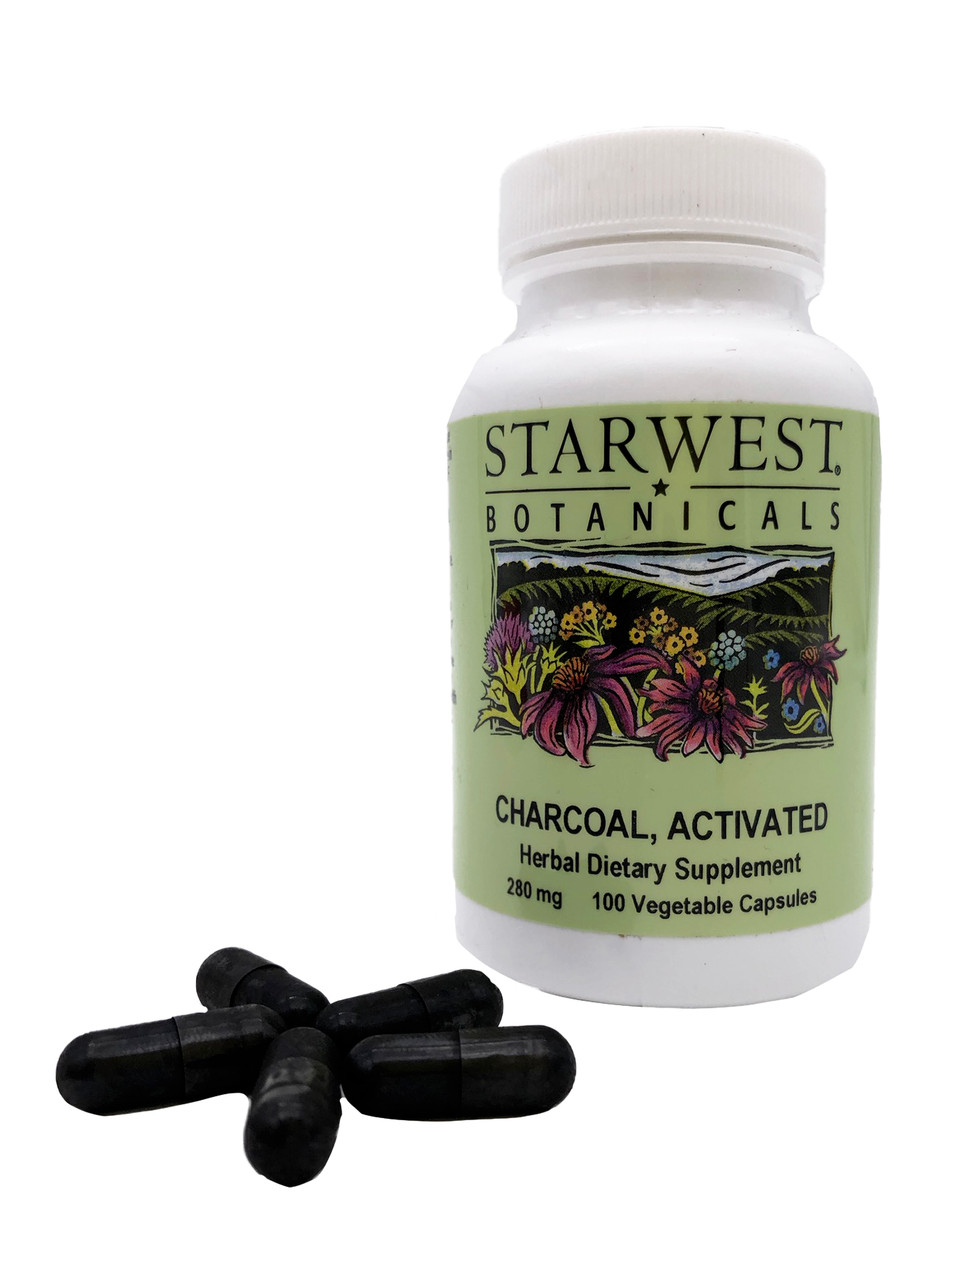 Starwest Botanicals Activated Charcoal 280mg Capsules 100 Count